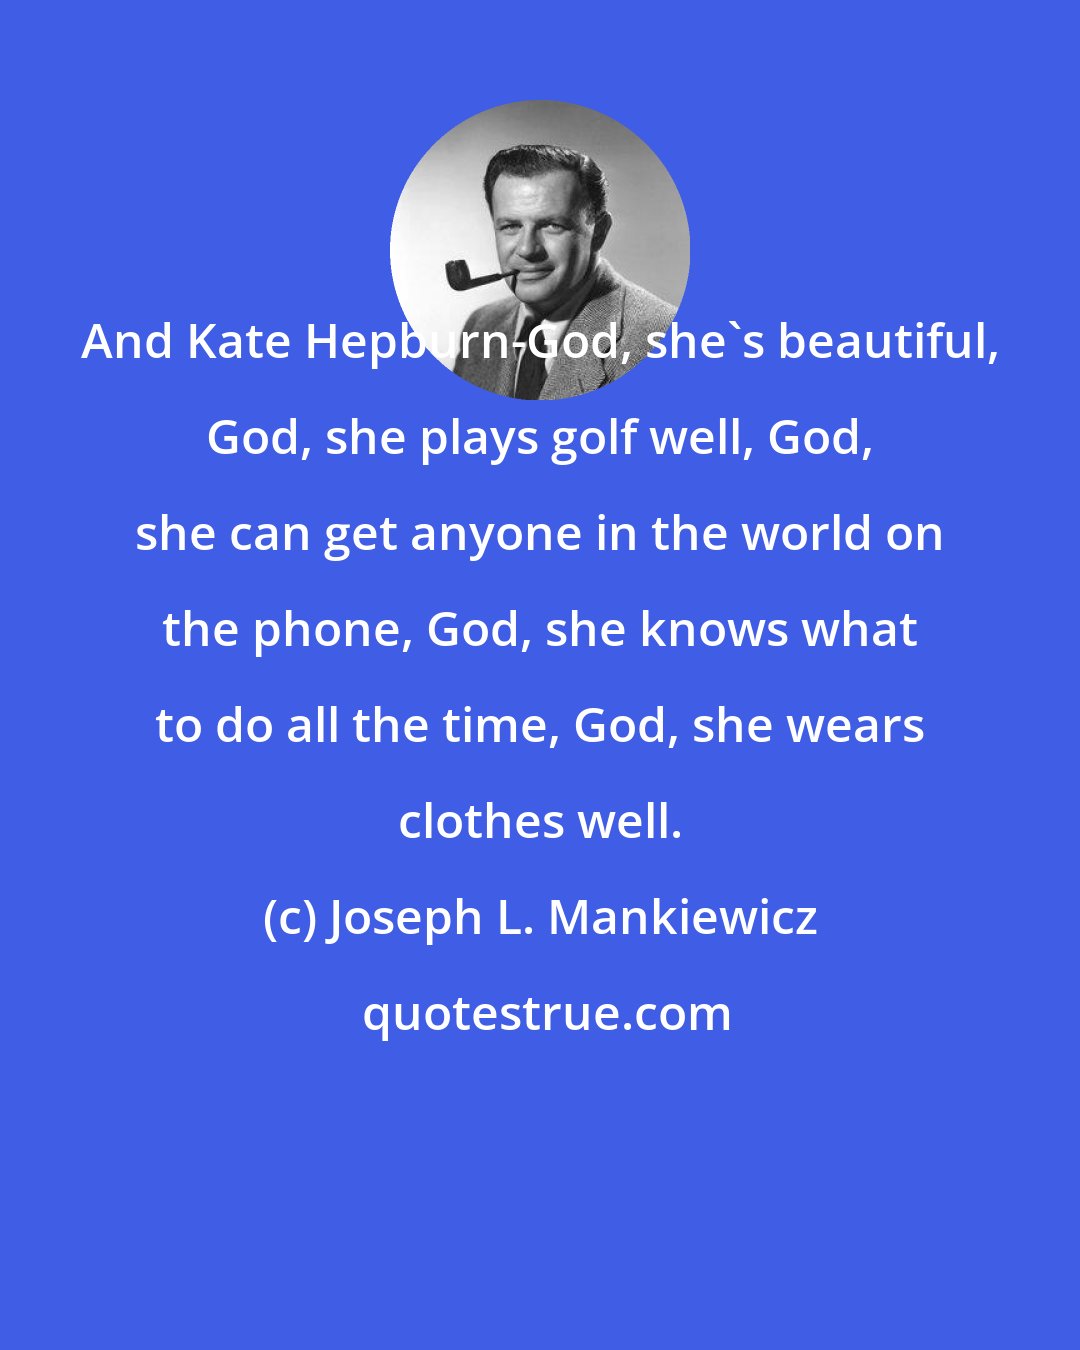 Joseph L. Mankiewicz: And Kate Hepburn-God, she's beautiful, God, she plays golf well, God, she can get anyone in the world on the phone, God, she knows what to do all the time, God, she wears clothes well.